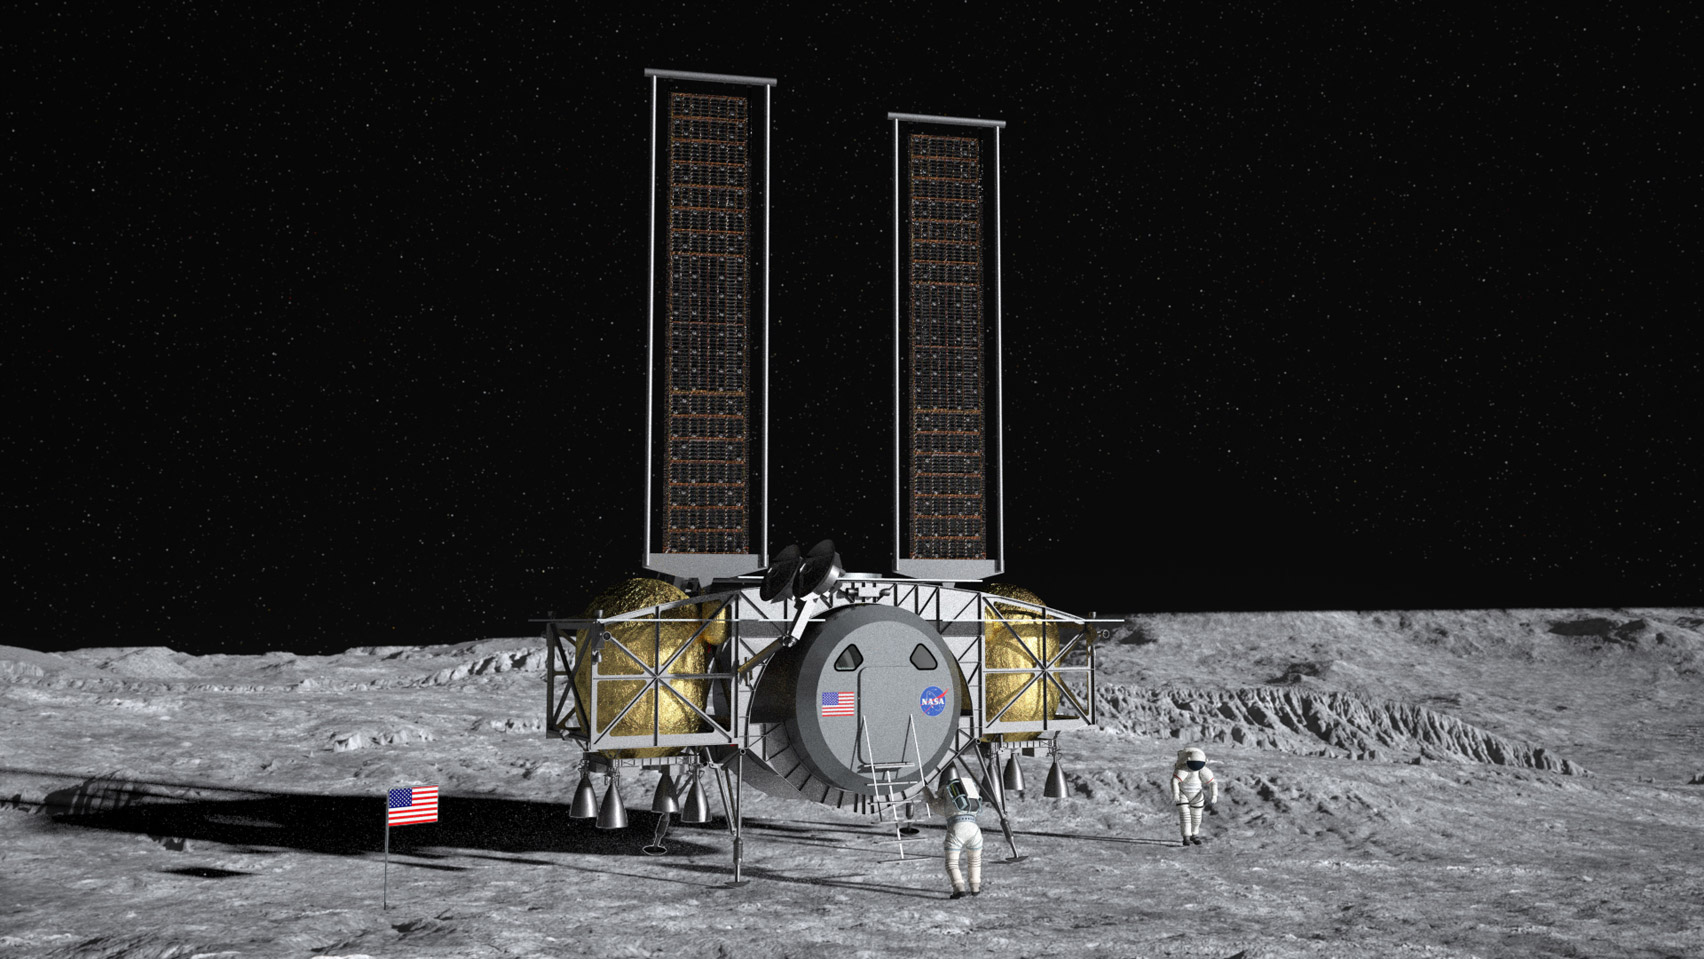 NASA selects Elon Musk and Jeff Bezos to design moon landers for 2024 mission